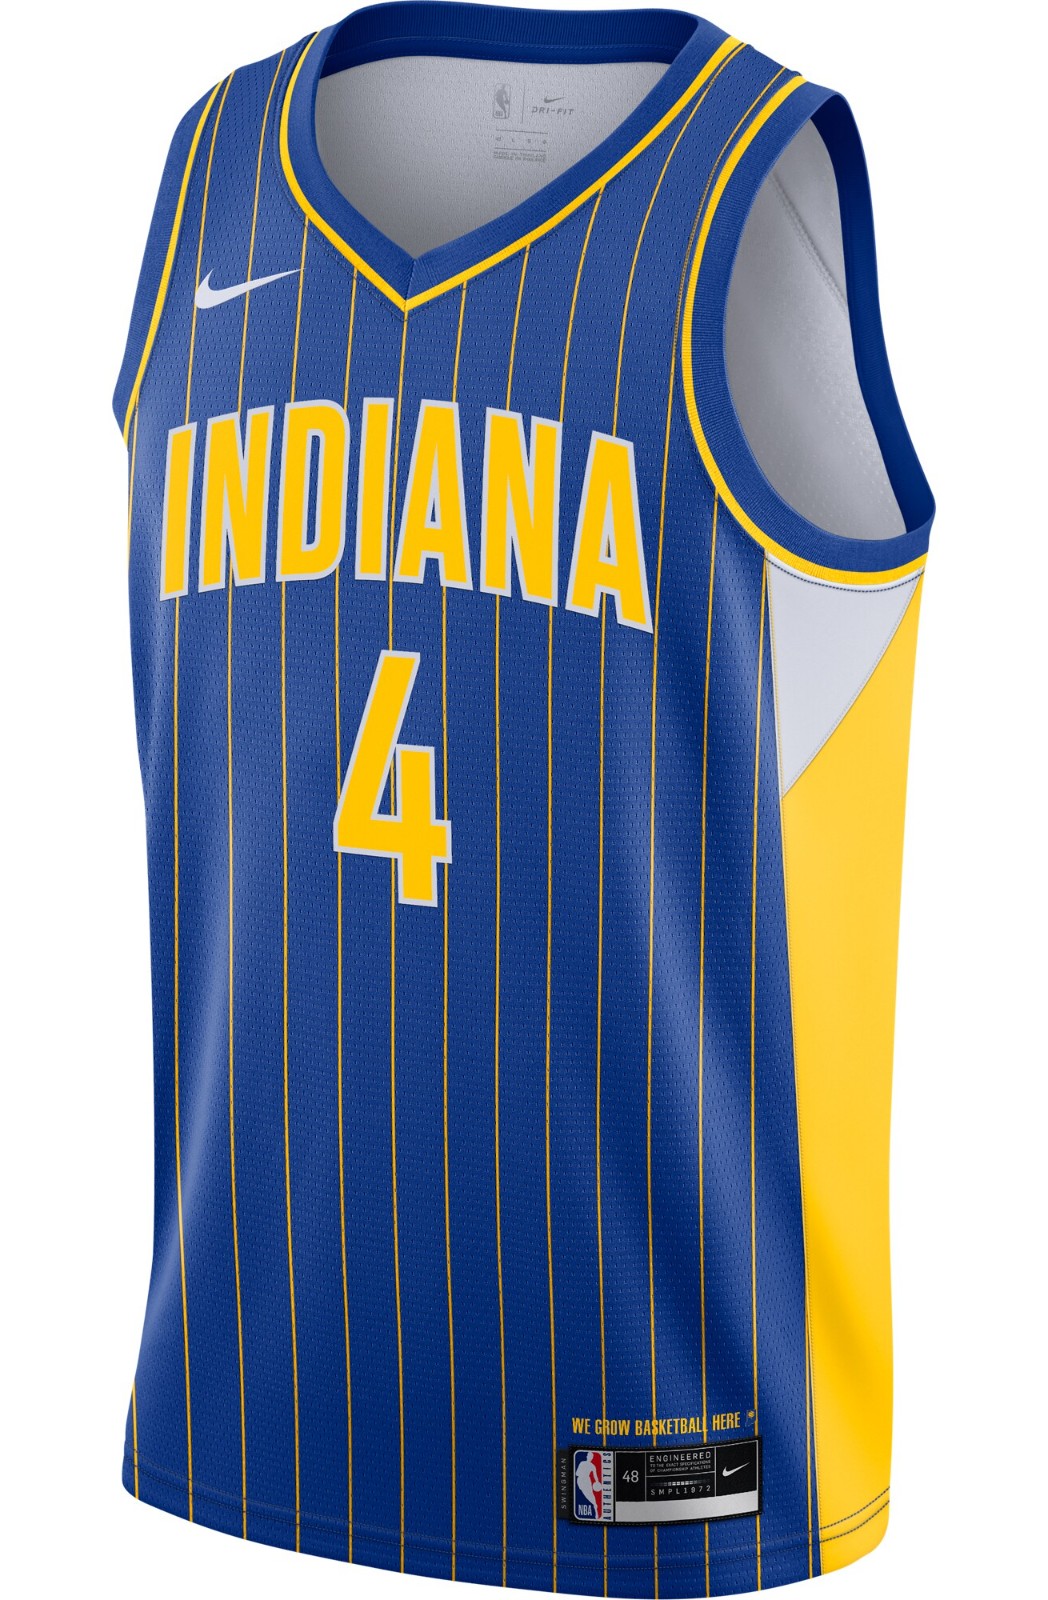 Indiana Pacers 20202021 City Jersey